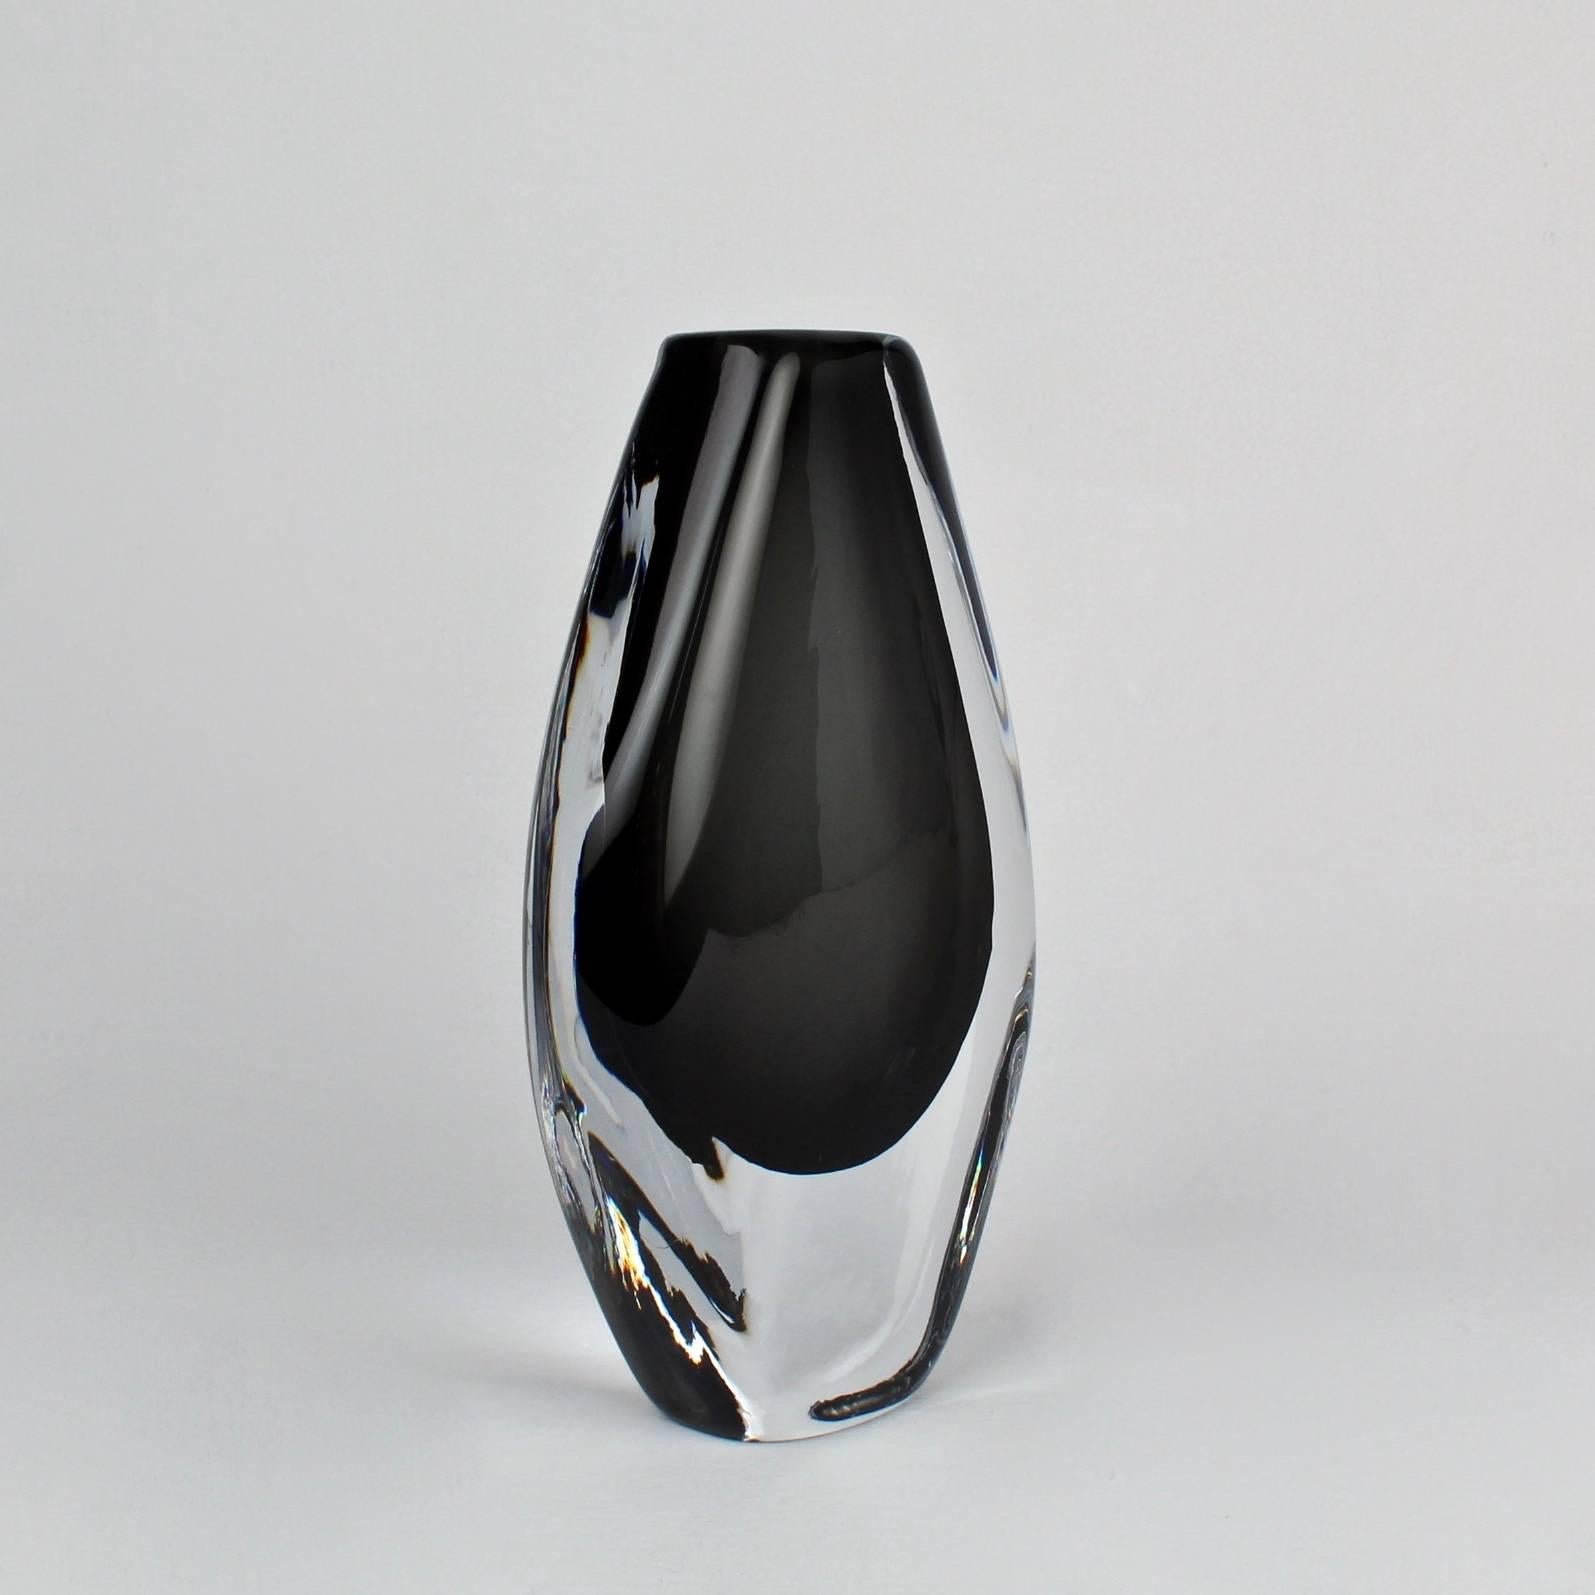 A Nils Landberg's teardrop form grey Sommerso glass vase. Good color. Good form.

Base etched Orrefor / CV / 3595-128.

Height: circa 8 in.

Items purchased from David Sterner Antiques must delight you. Purchases may be returned for any reason